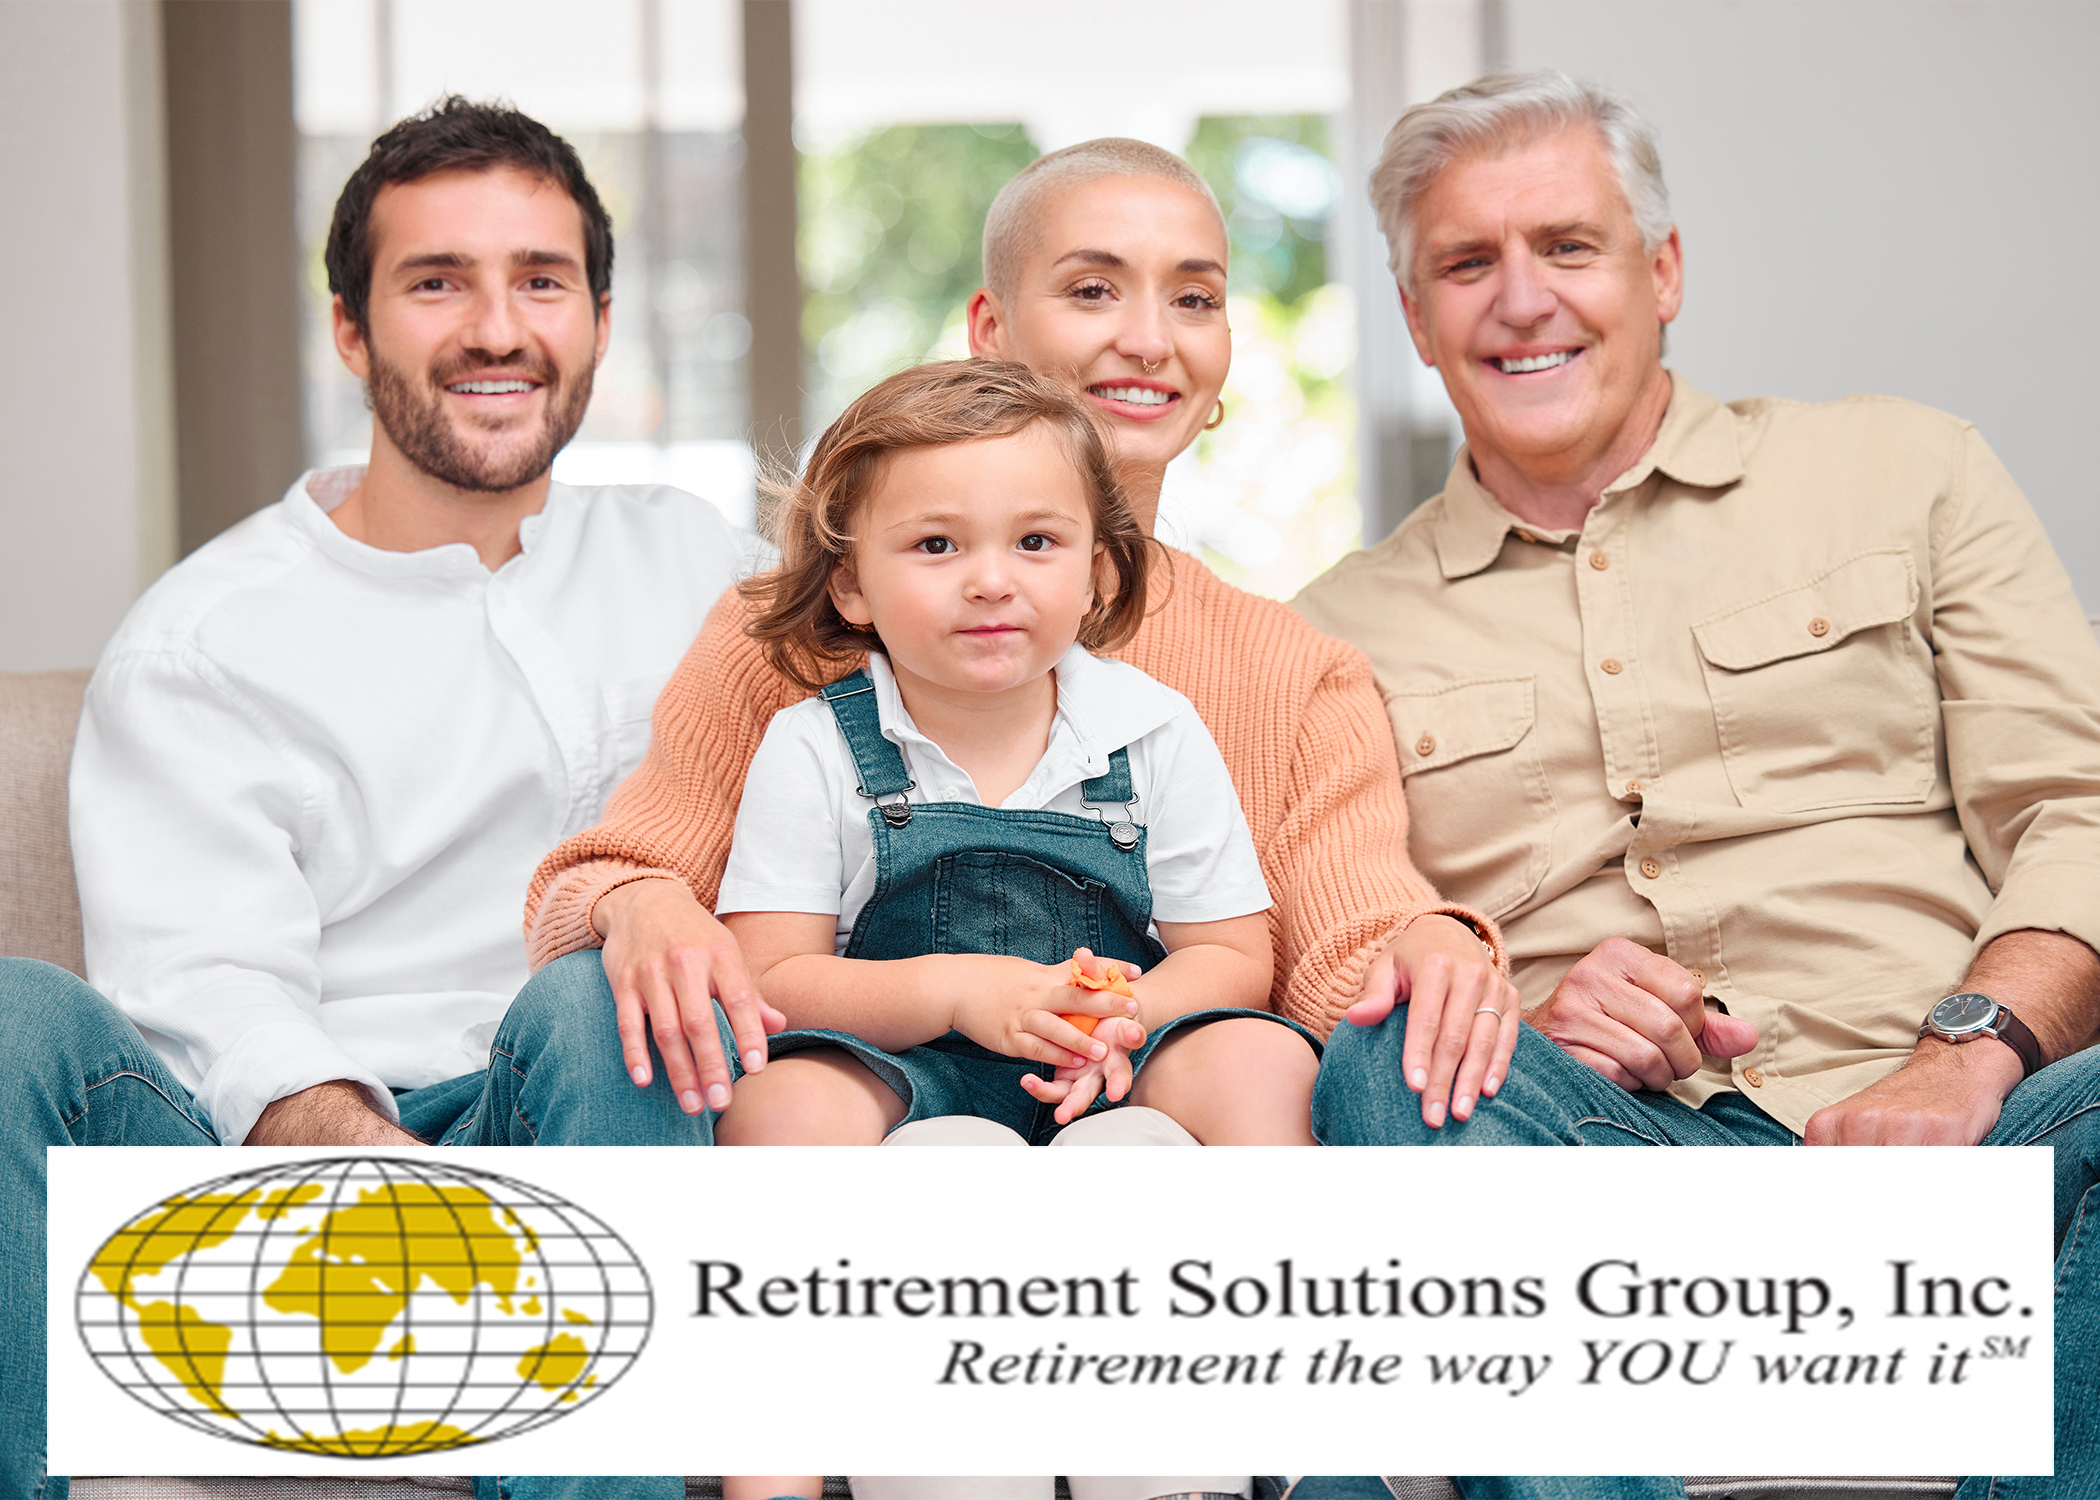 Legacy Planning for Retirement: Securing Financial Stability for Loved Ones